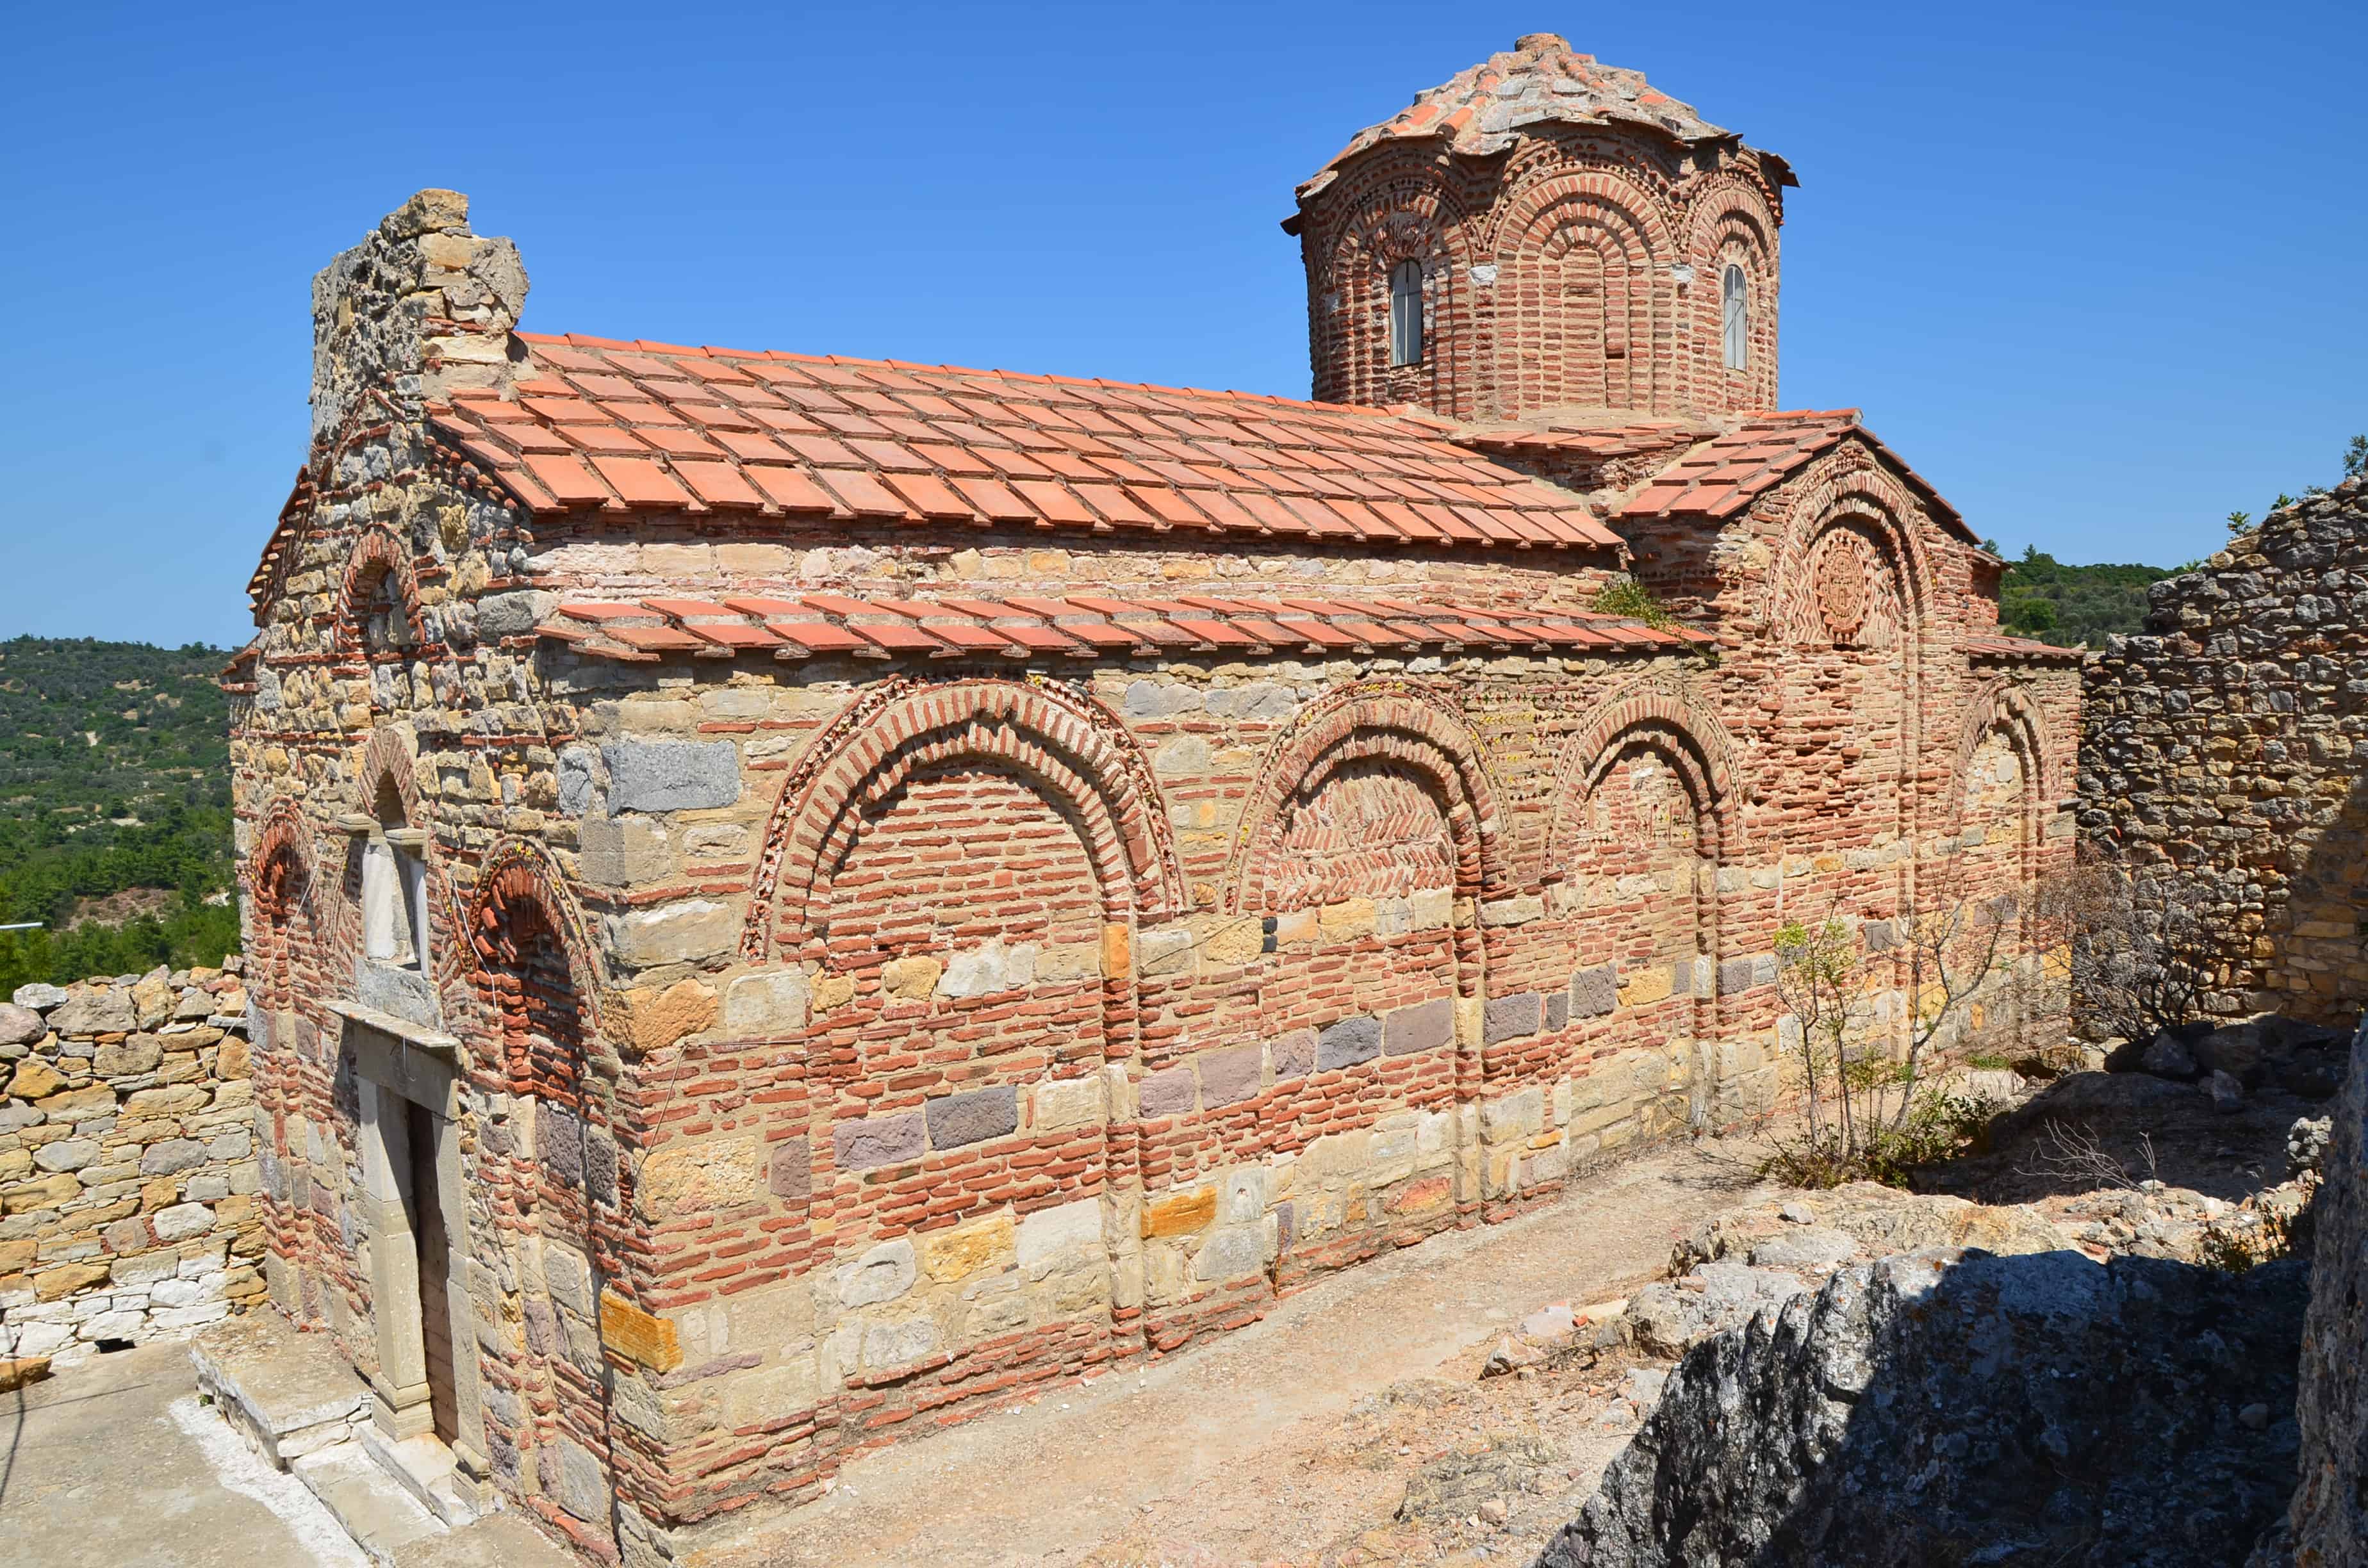 Panagia Sikelia in Chios, Greece